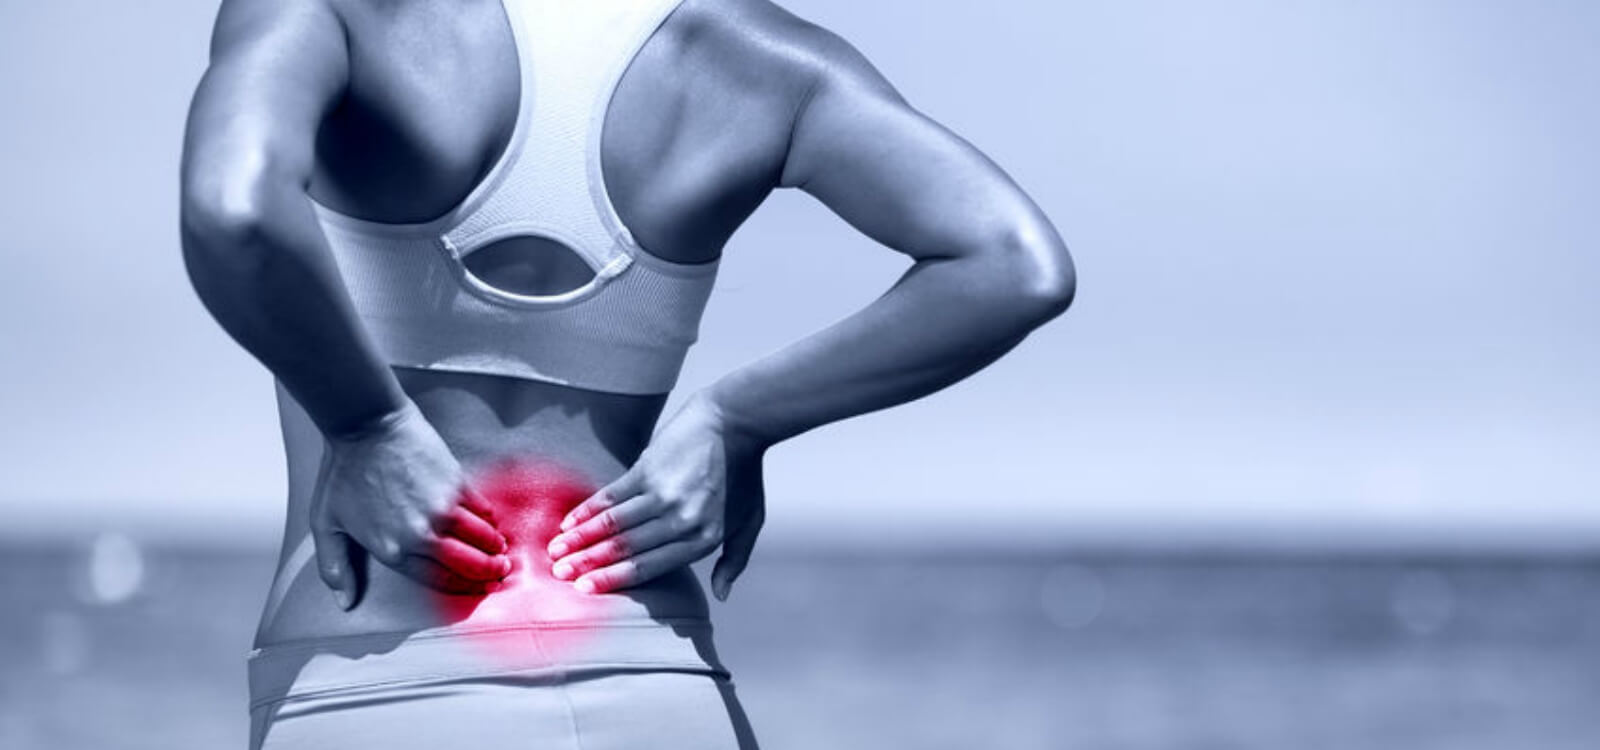 lower back pain relief